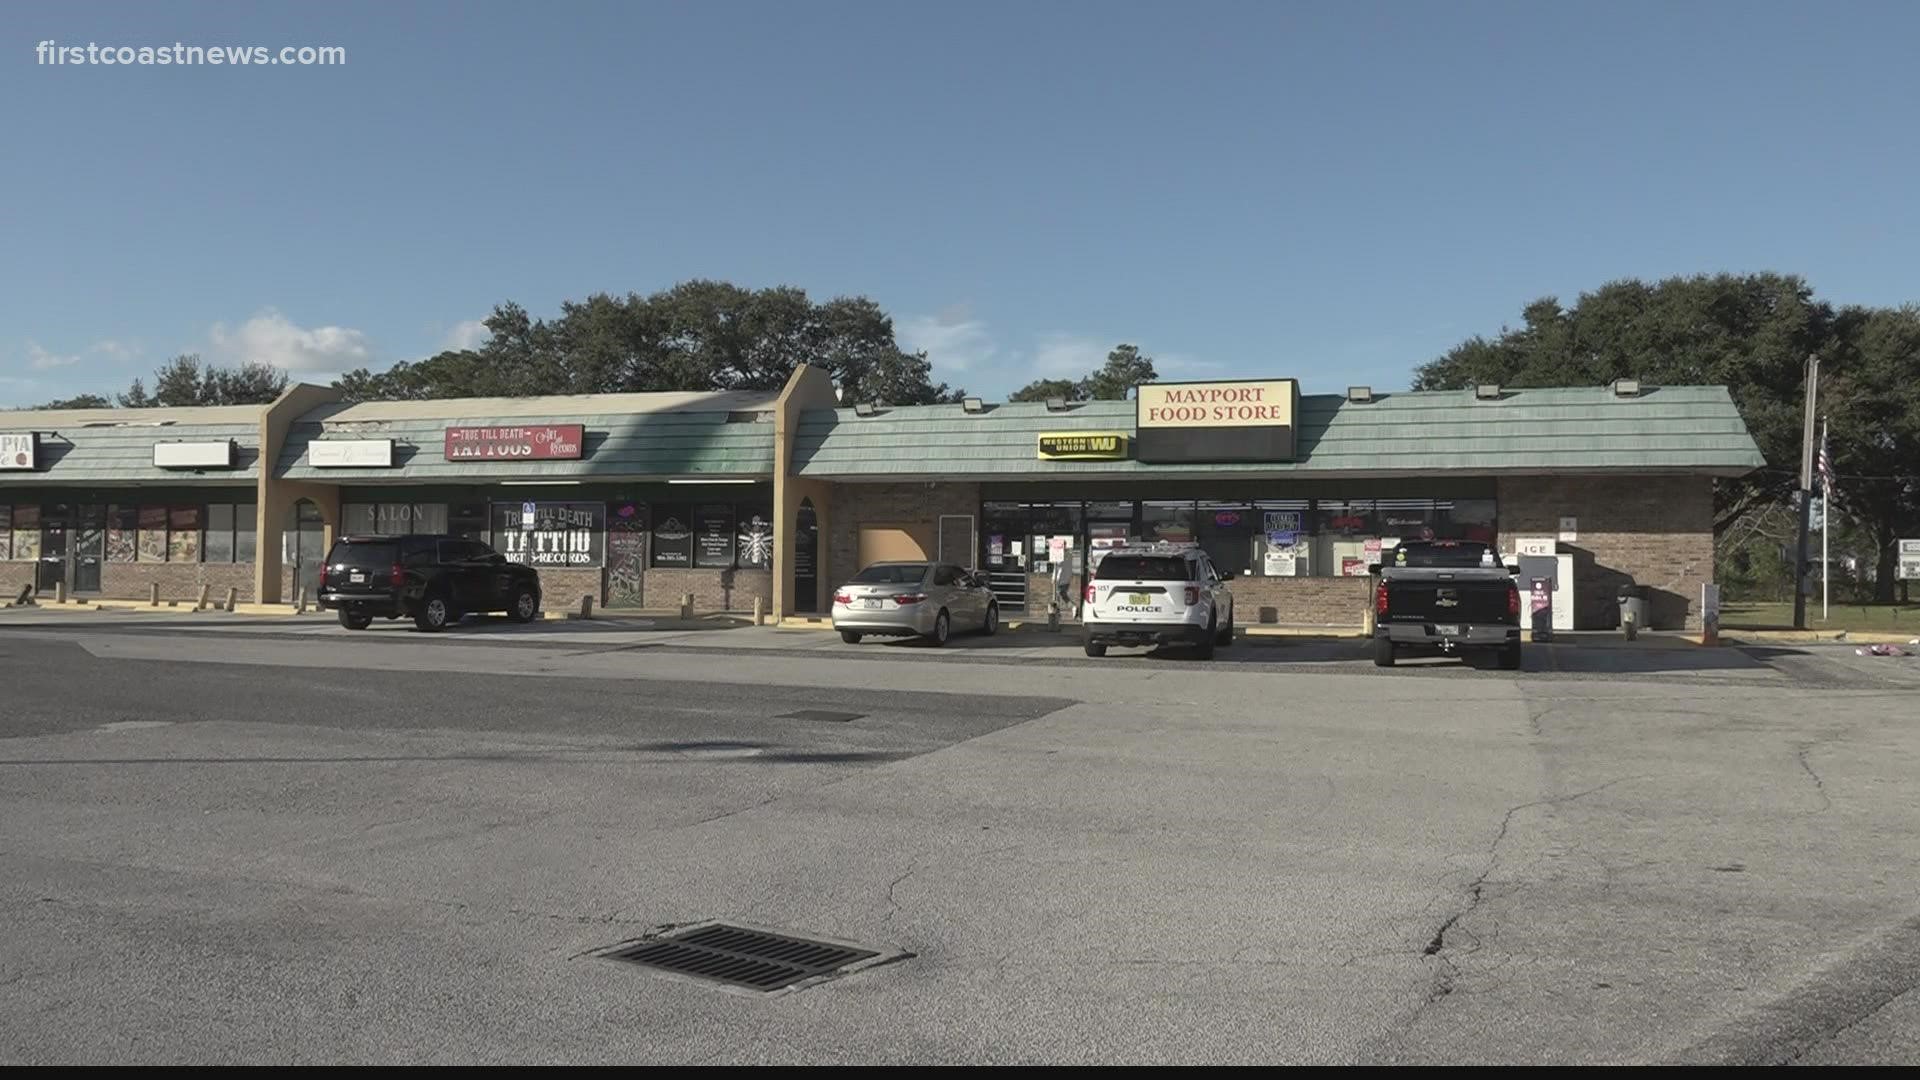 Police said the incident happened at the Mayport Food Store. The victims were transported to local hospitals with non-life-threatening injuries.